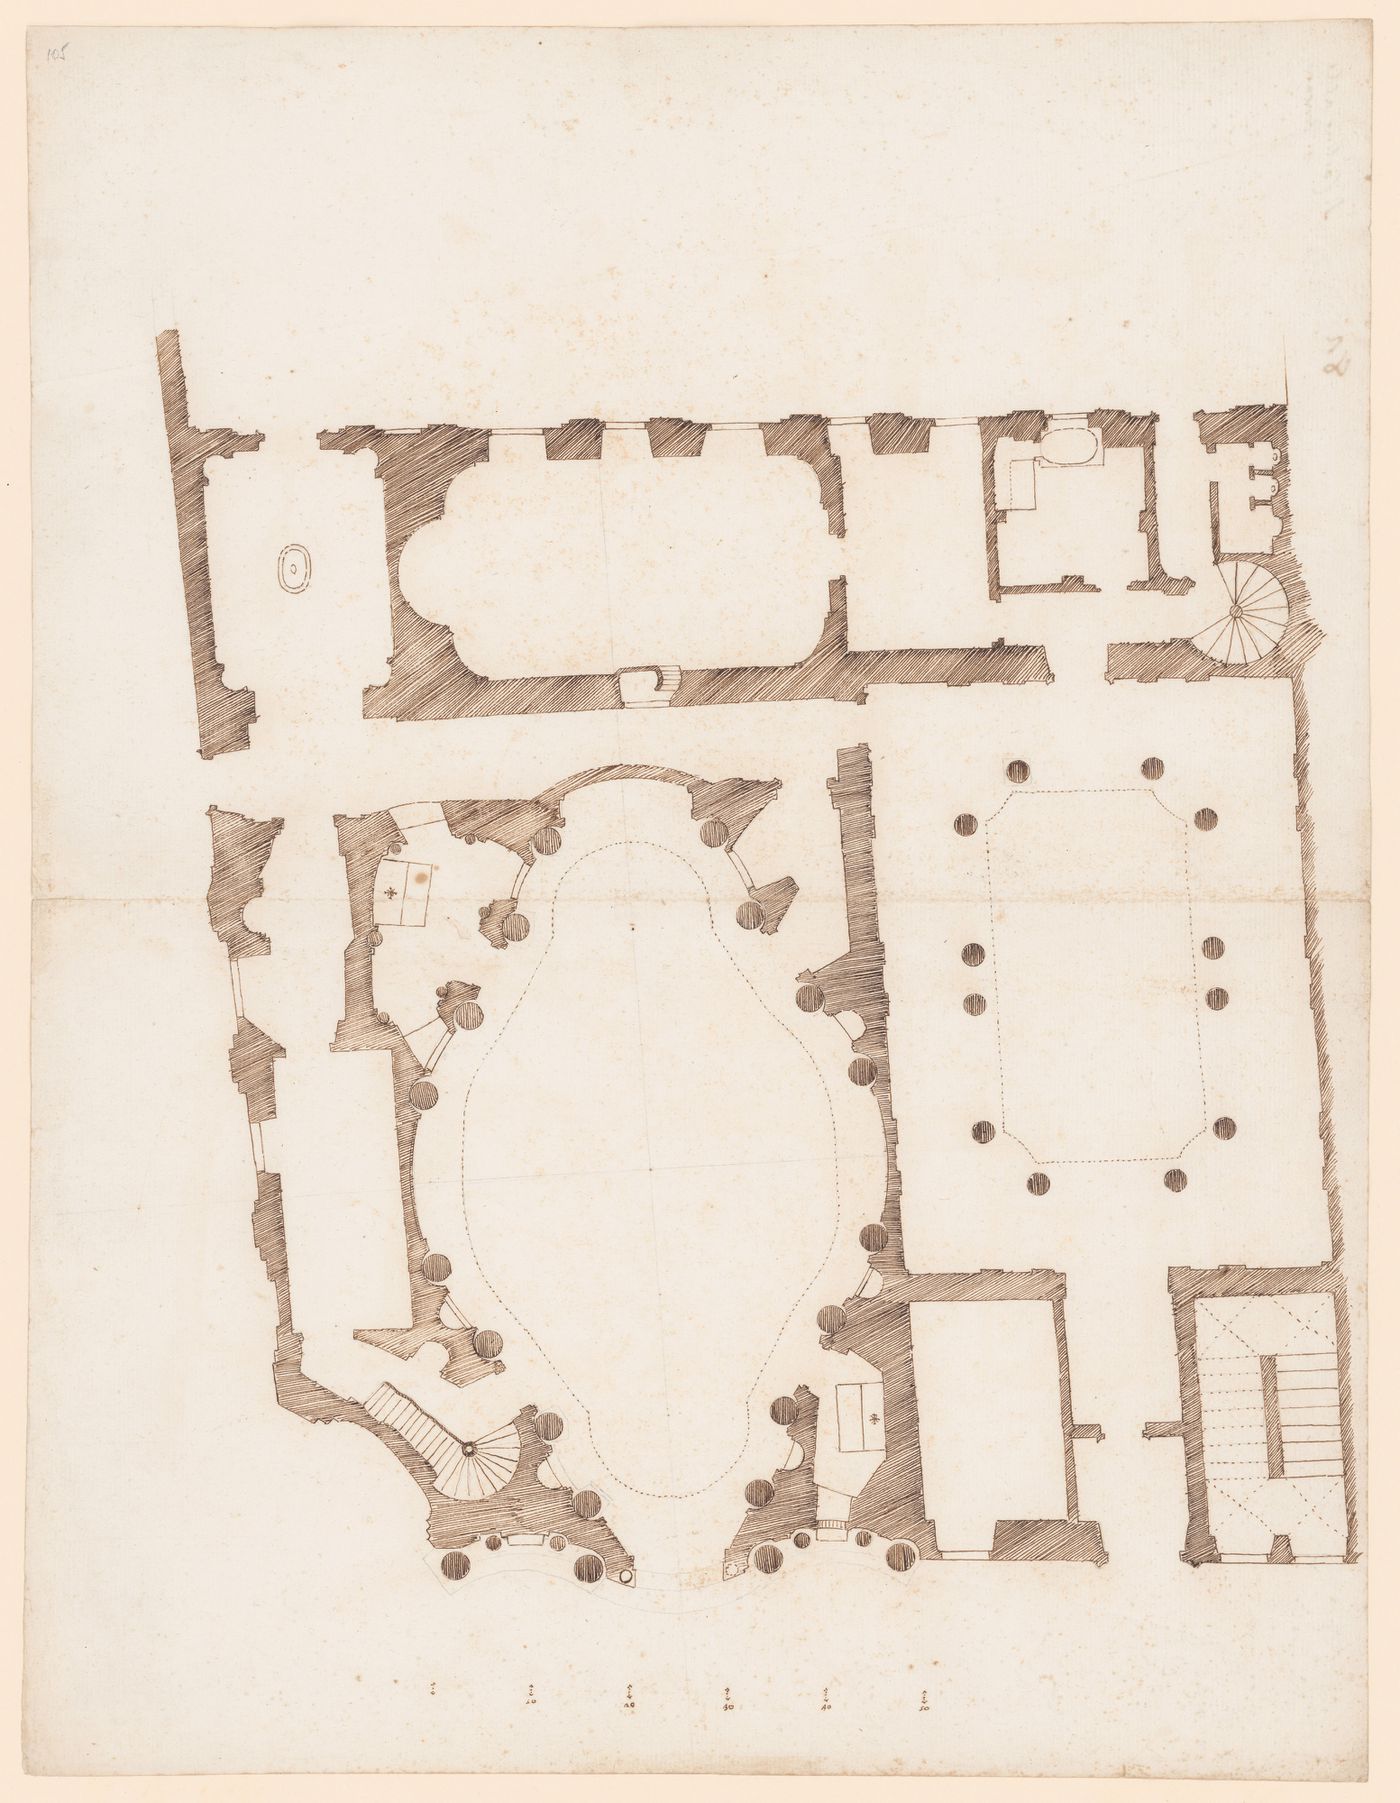 Plan of the church and monastery of San Carlo alle Quattro Fontane, Rome, Italy